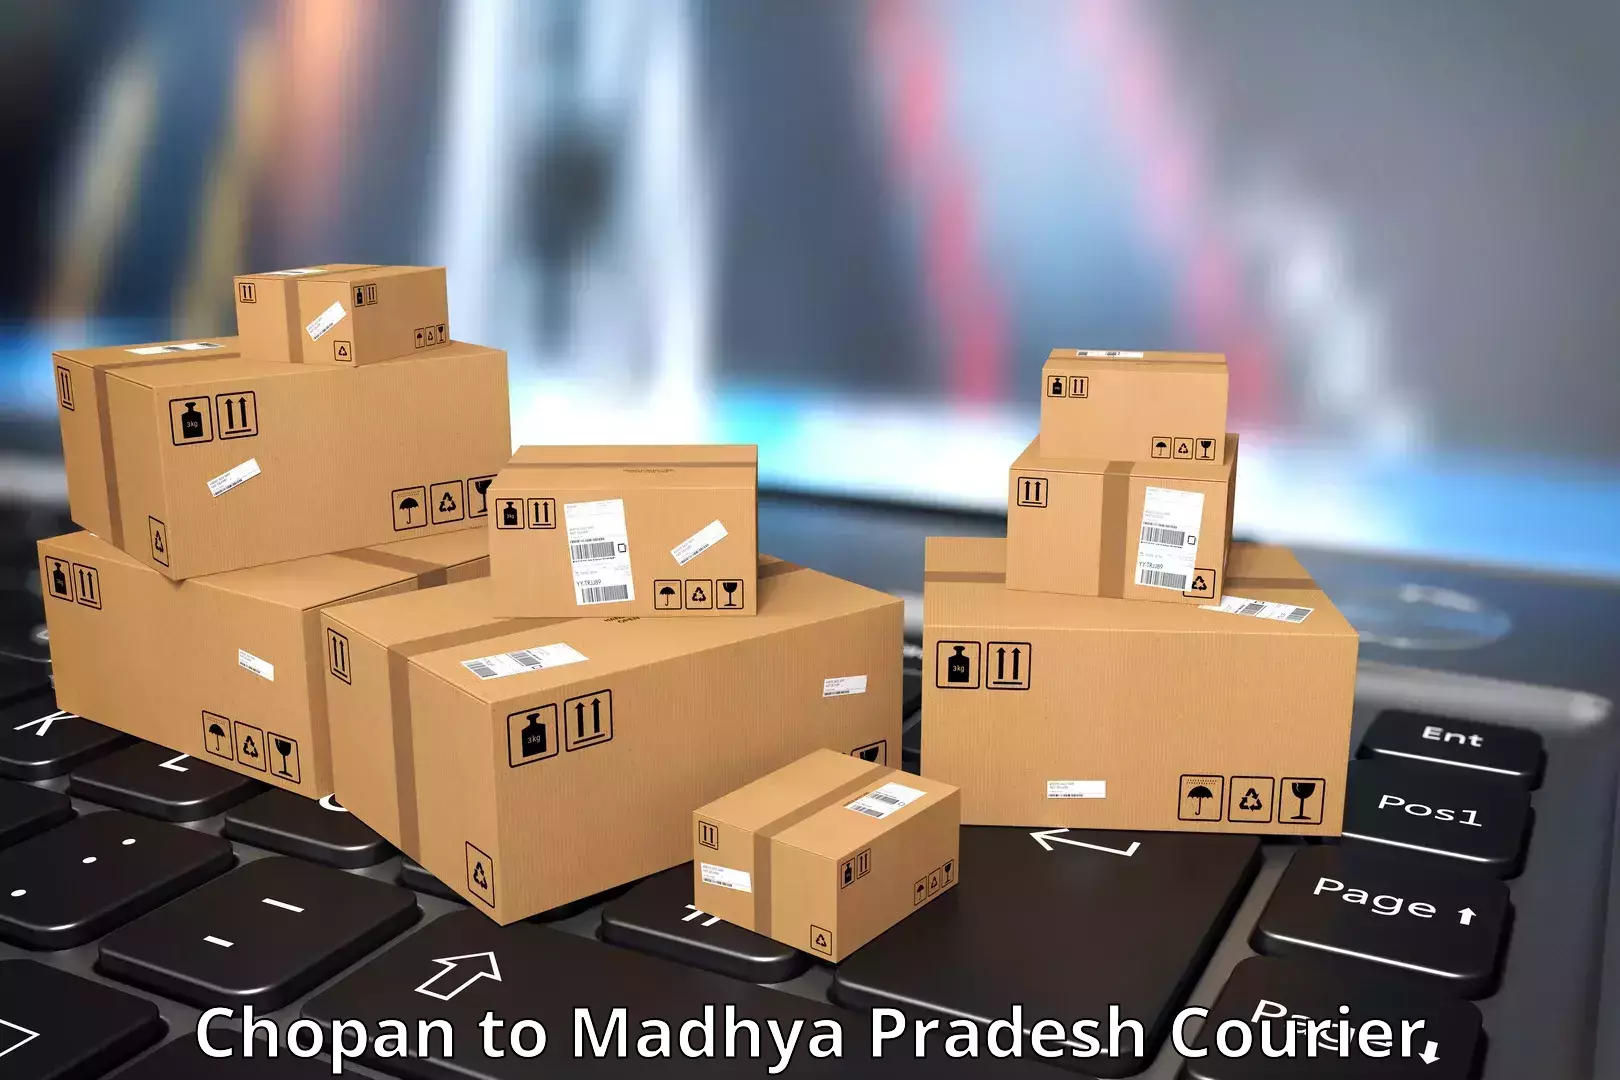 Efficient courier operations Chopan to IIIT Bhopal